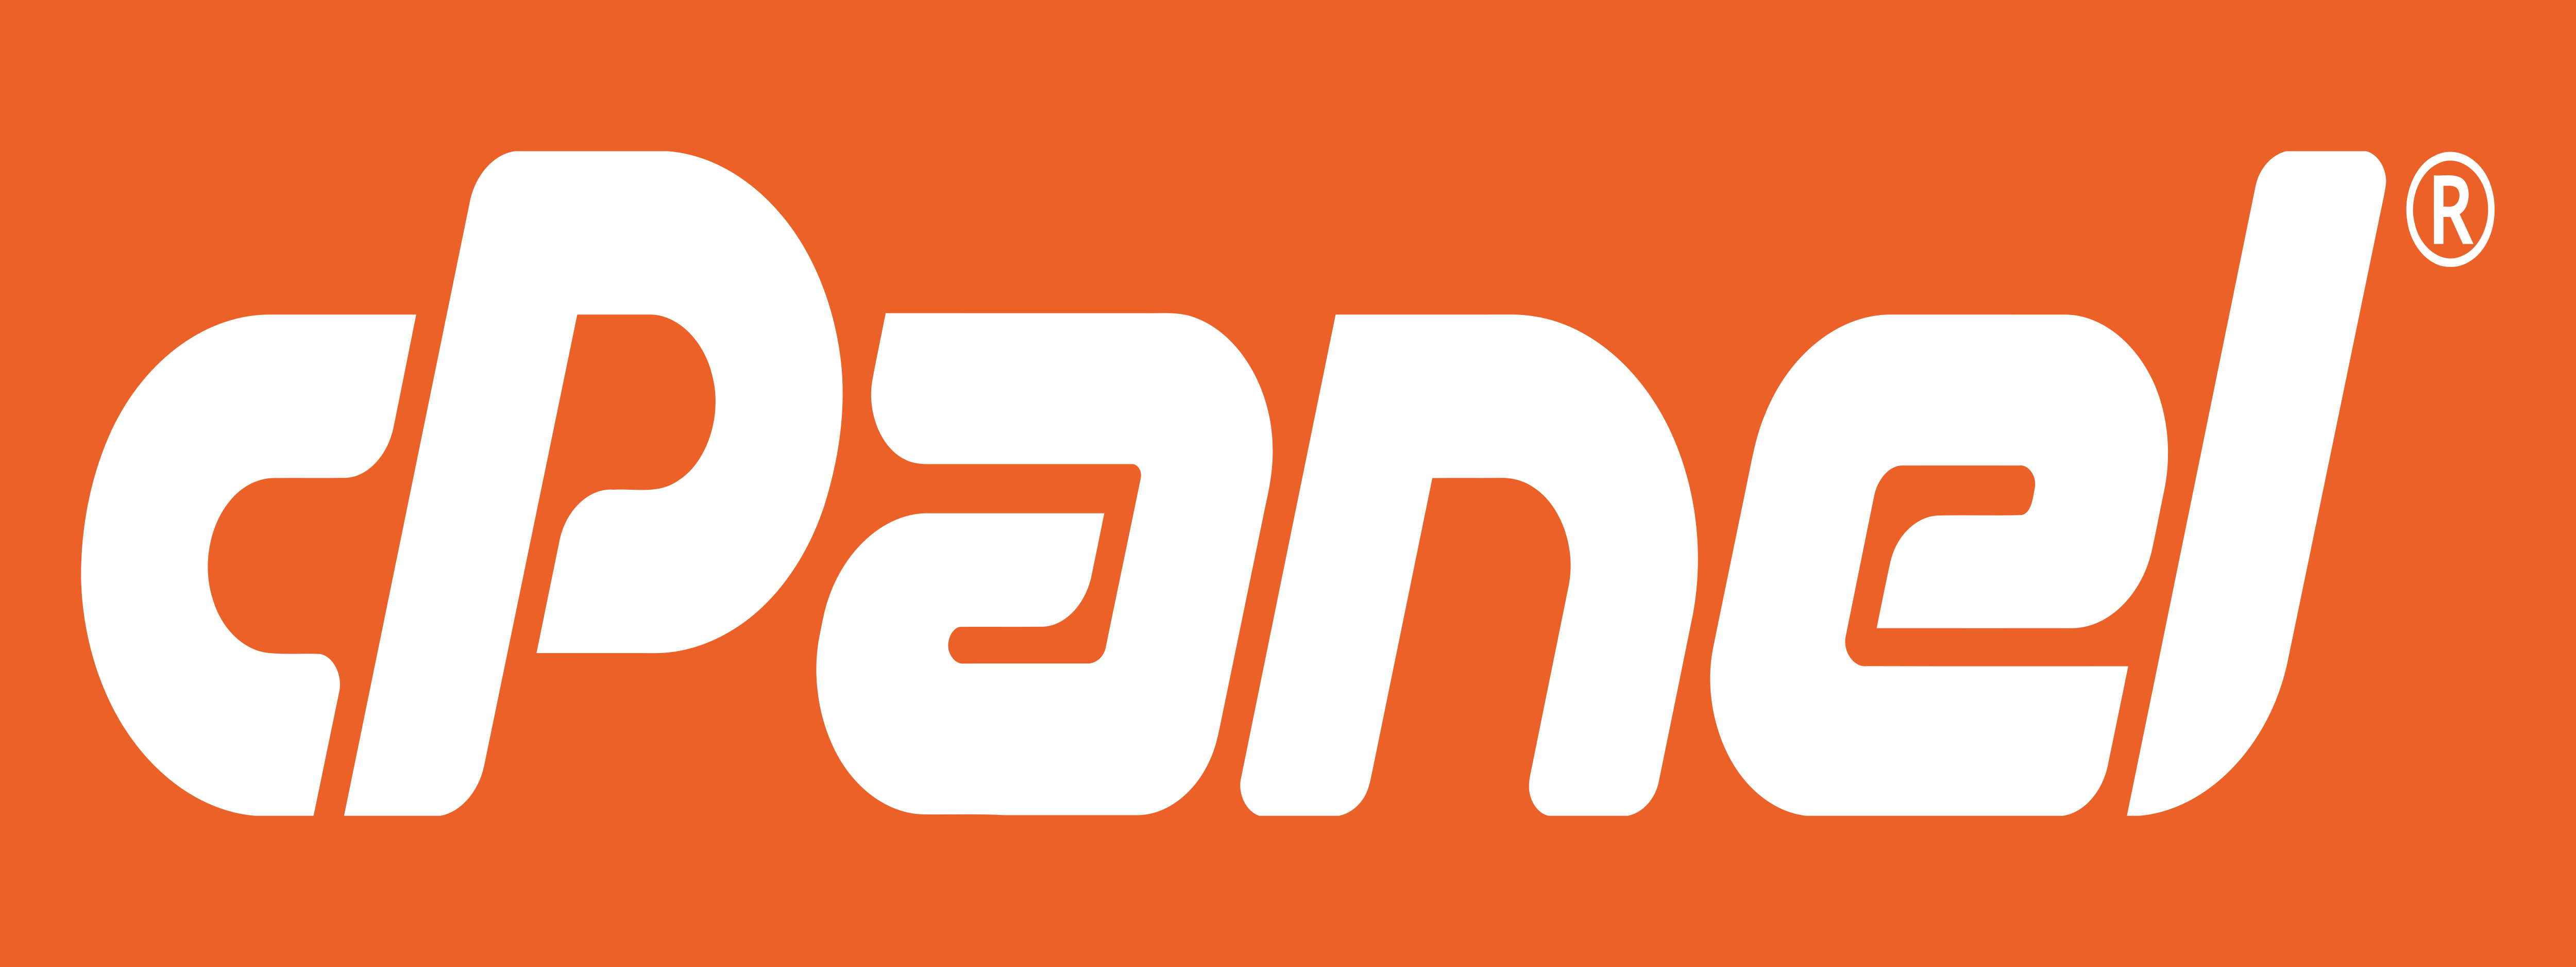 download cpanel